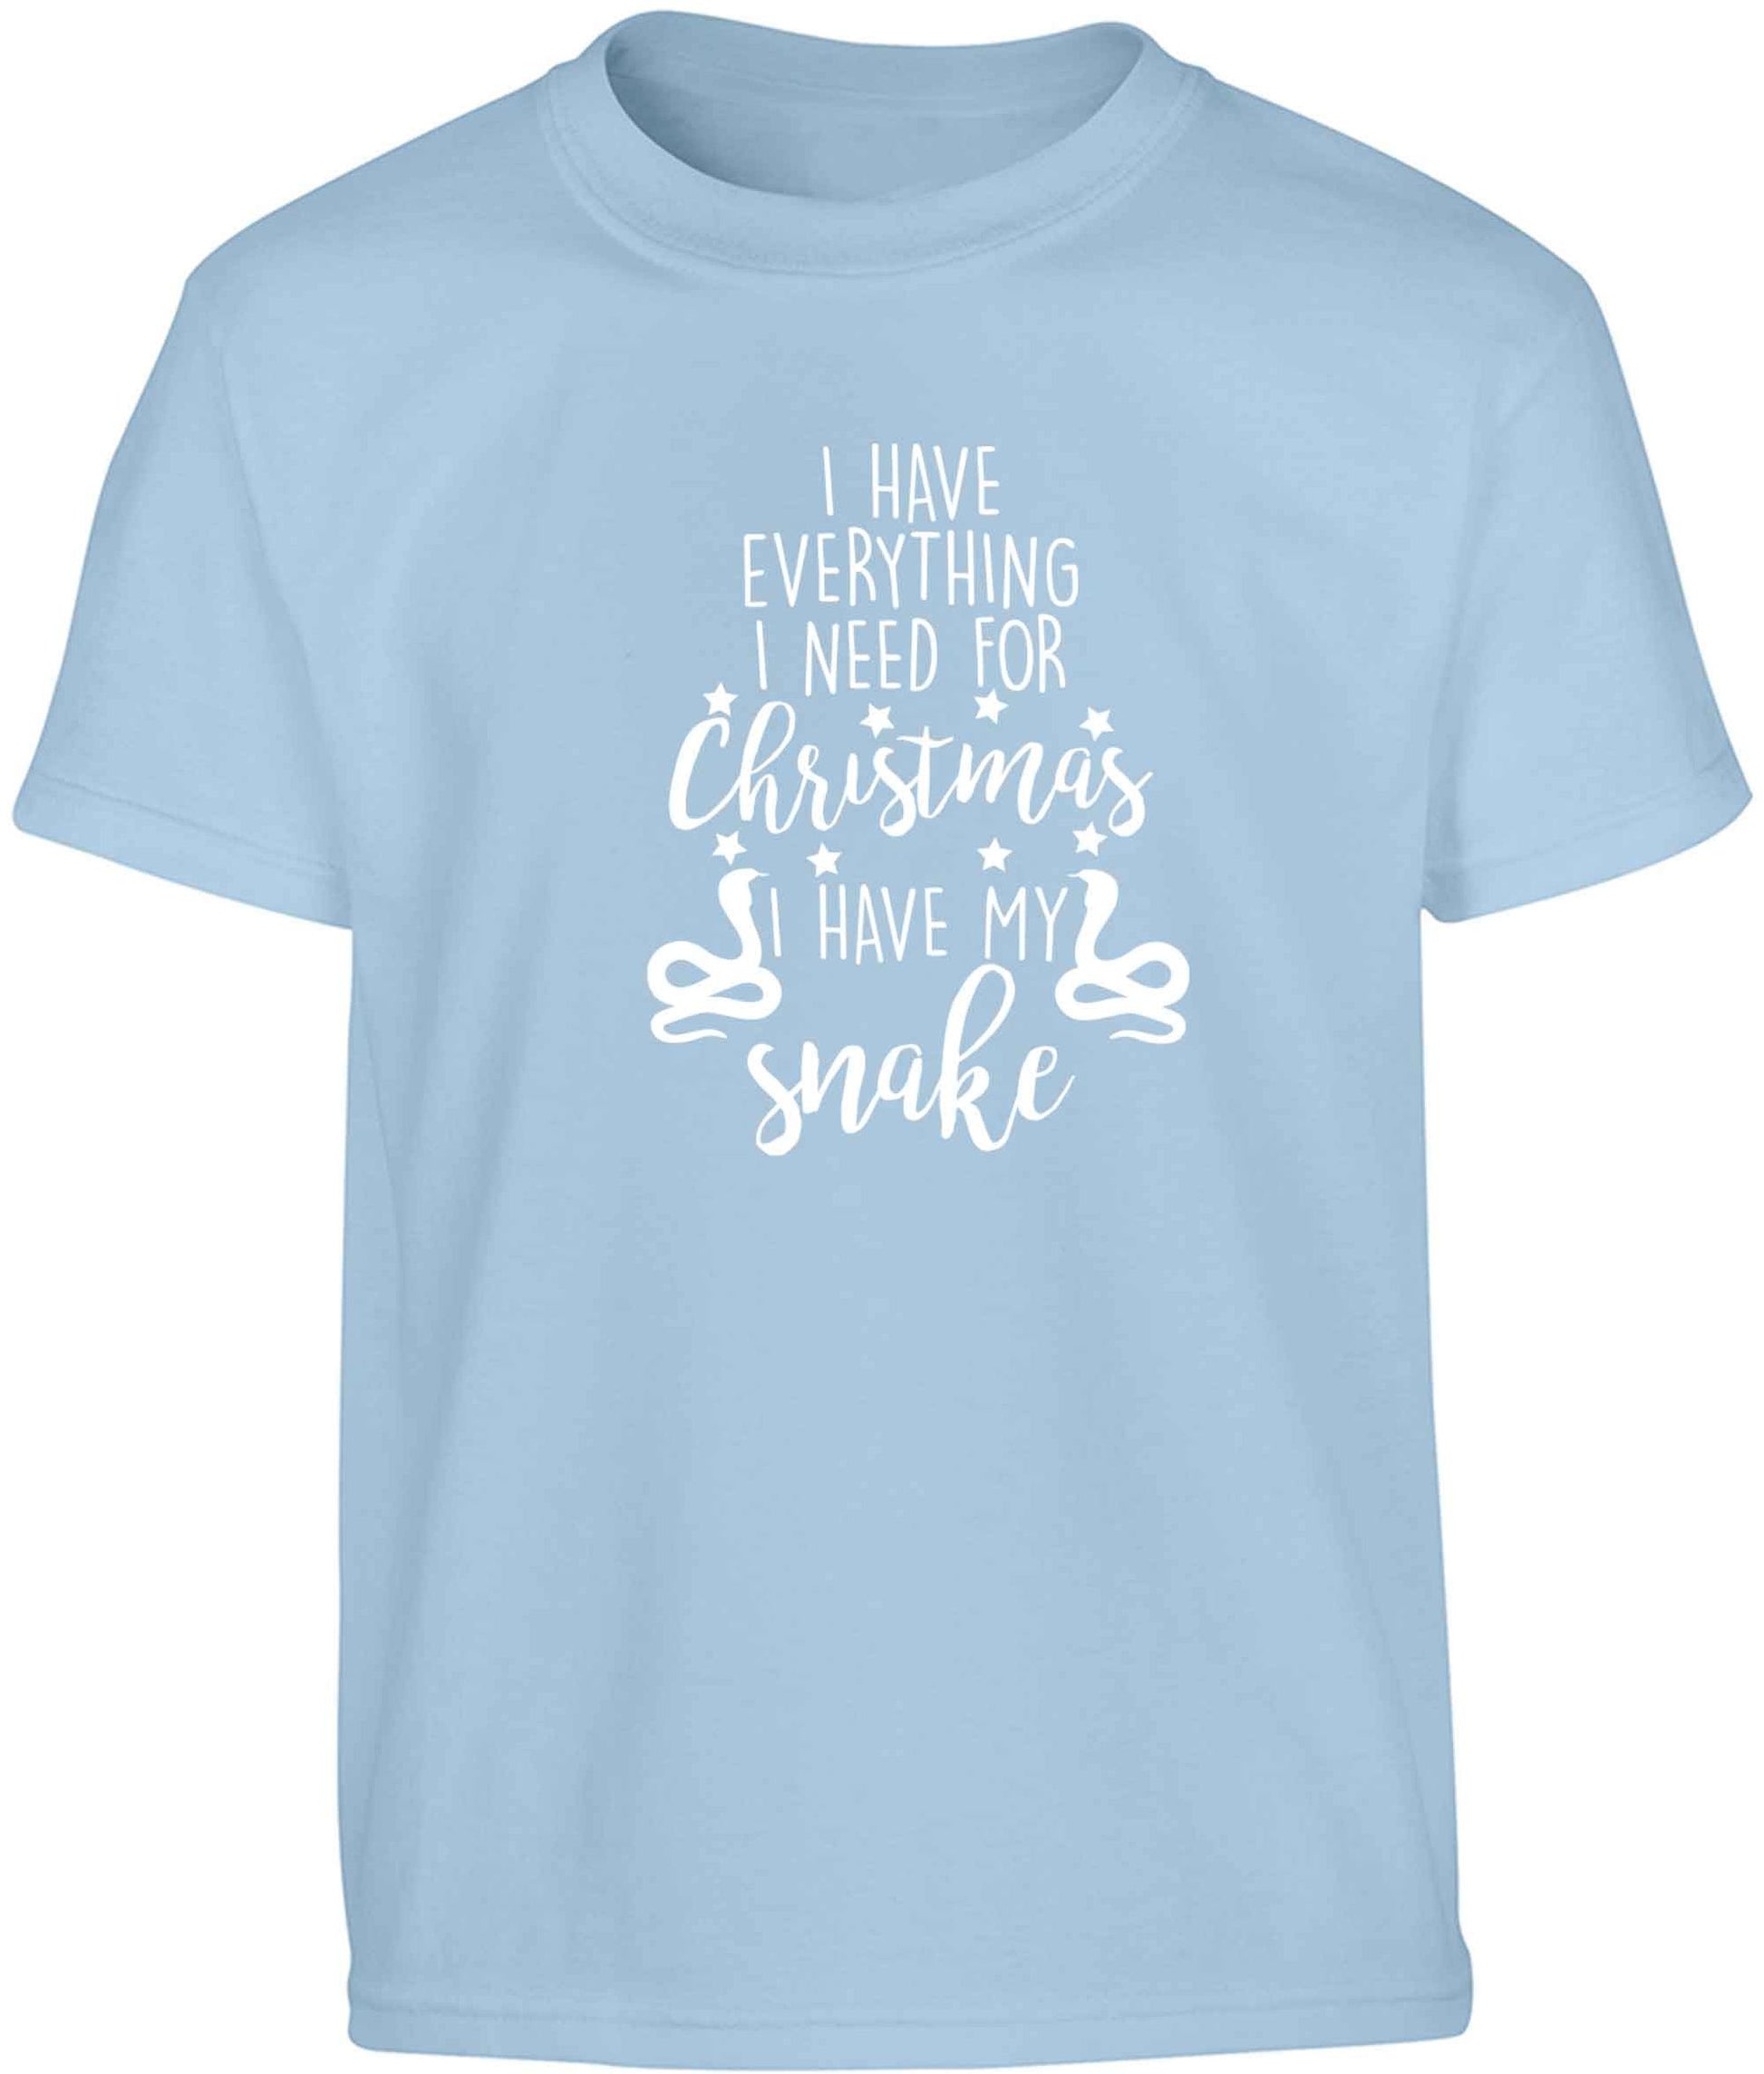 I have everything I need for Christmas I have my snake Children's light blue Tshirt 12-13 Years